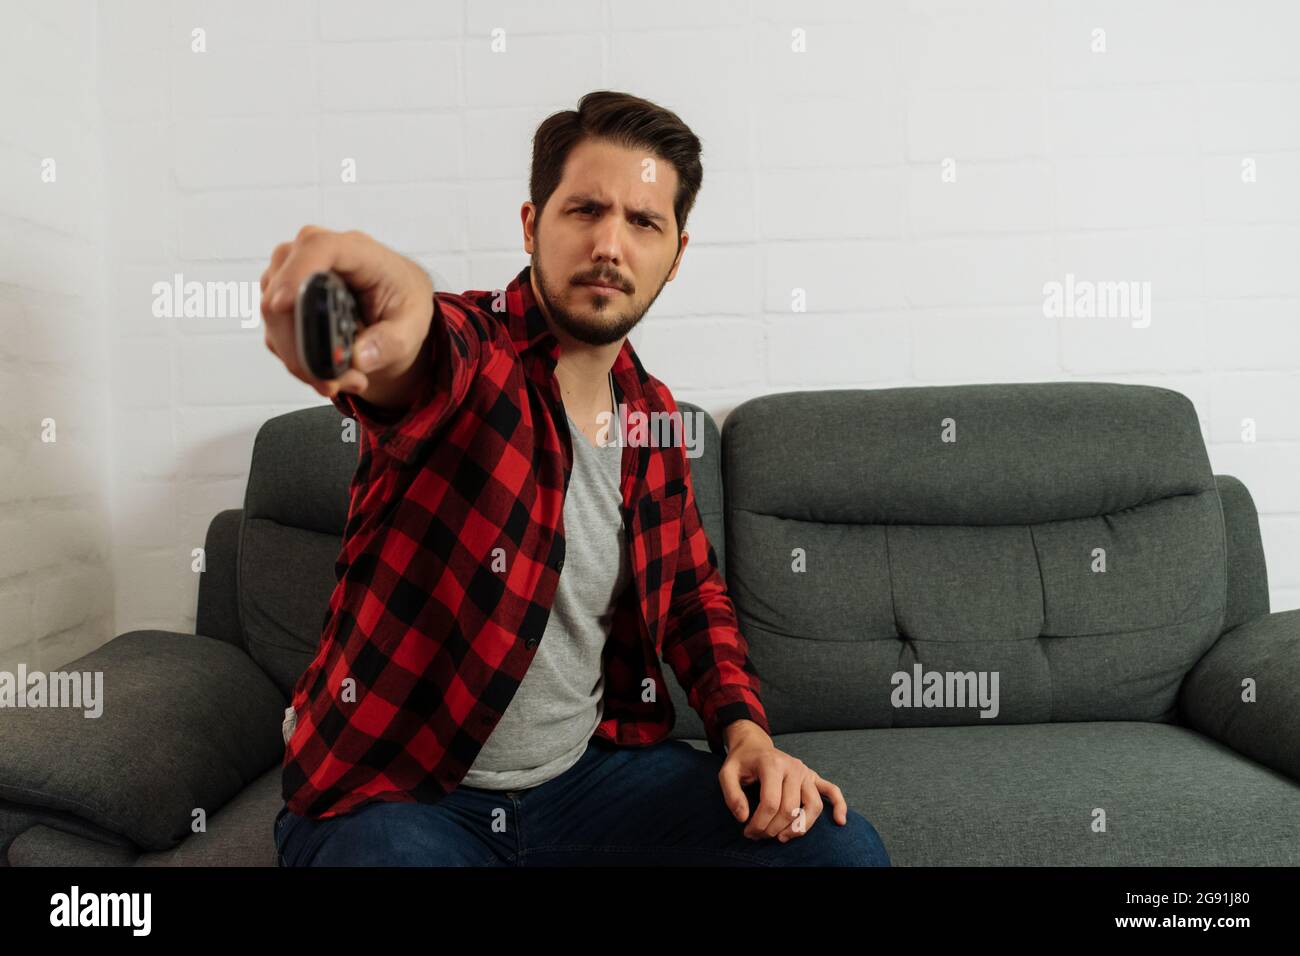 latin man with expression of concentration changing channel with remote control Stock Photo